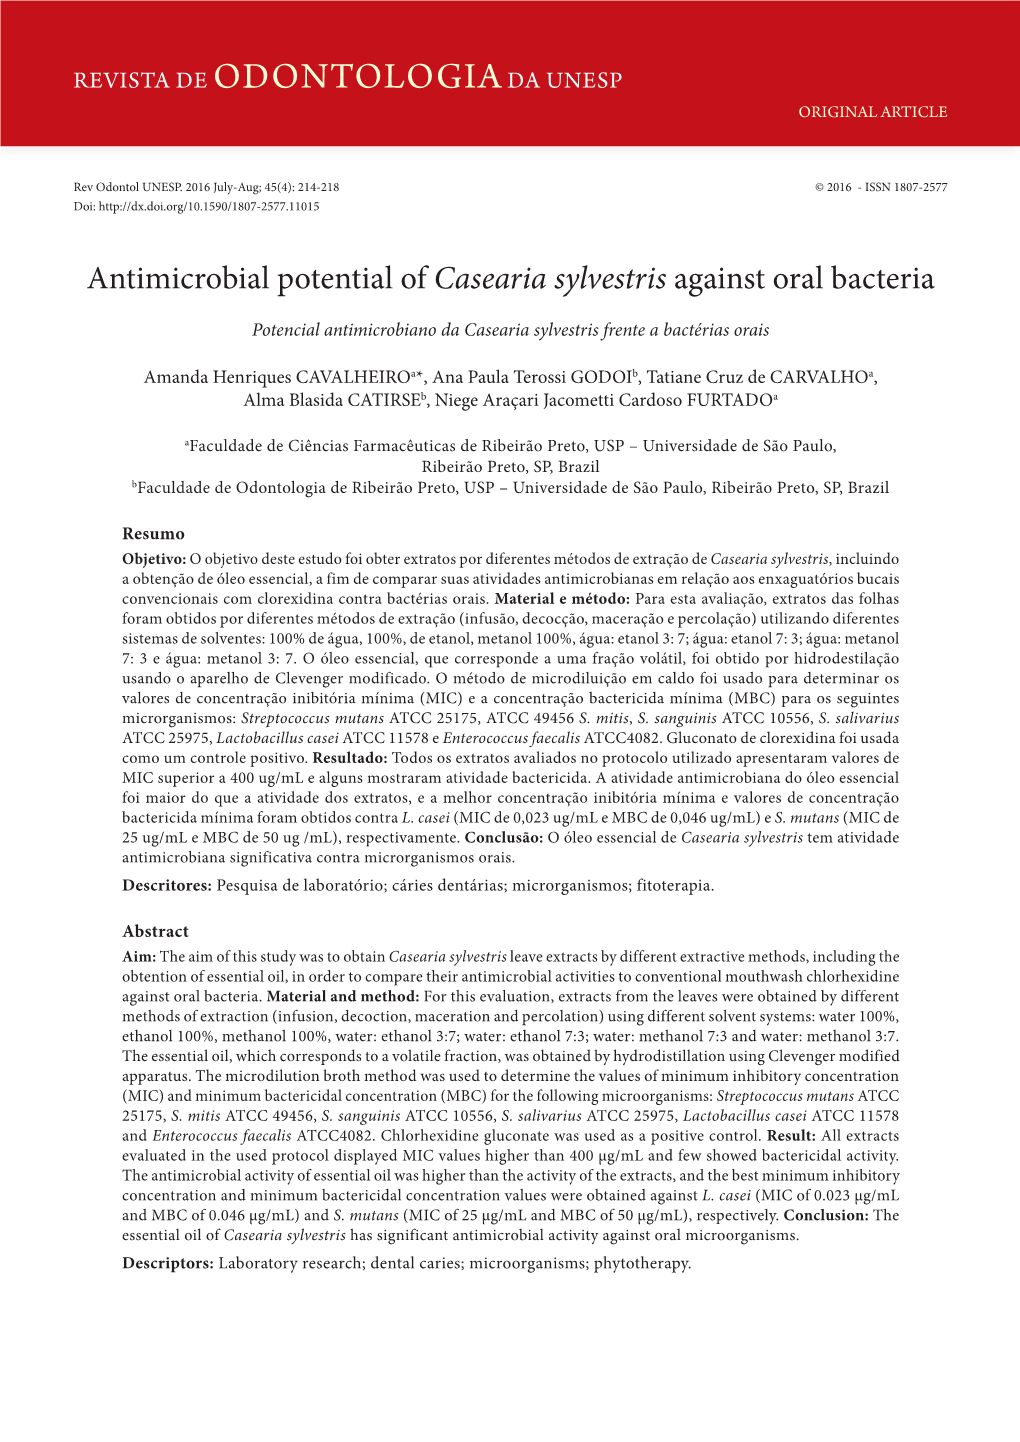 Antimicrobial Potential of Casearia Sylvestris Against Oral Bacteria